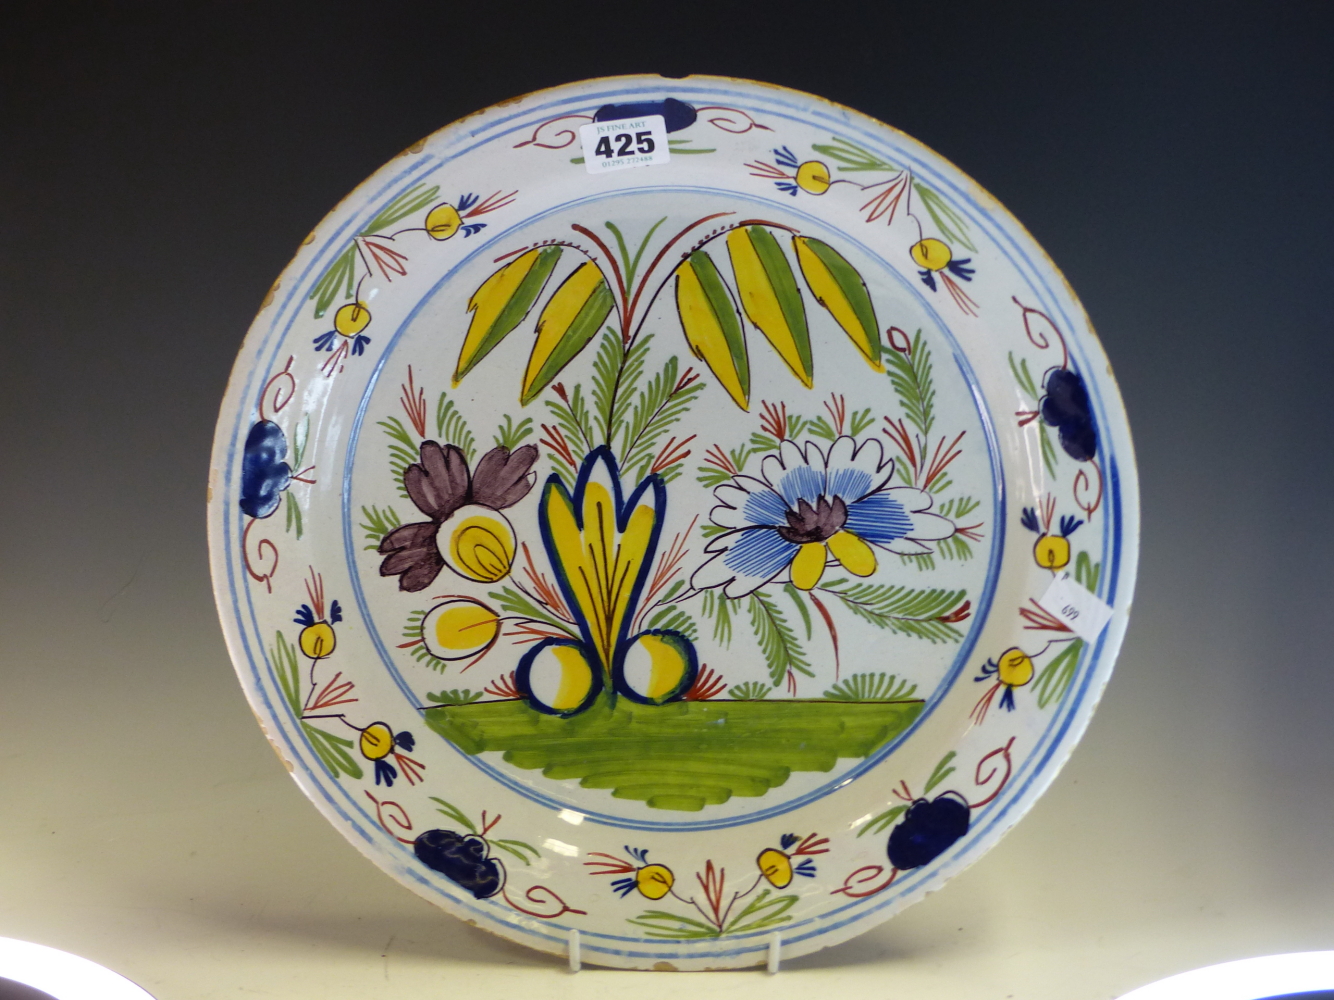 A DUTCH DELFT POLYCHROME DISH, THE CENTRAL EXPLOSION OF FLOWERS ENCLOSED BY A RIM BAND OF BLUE